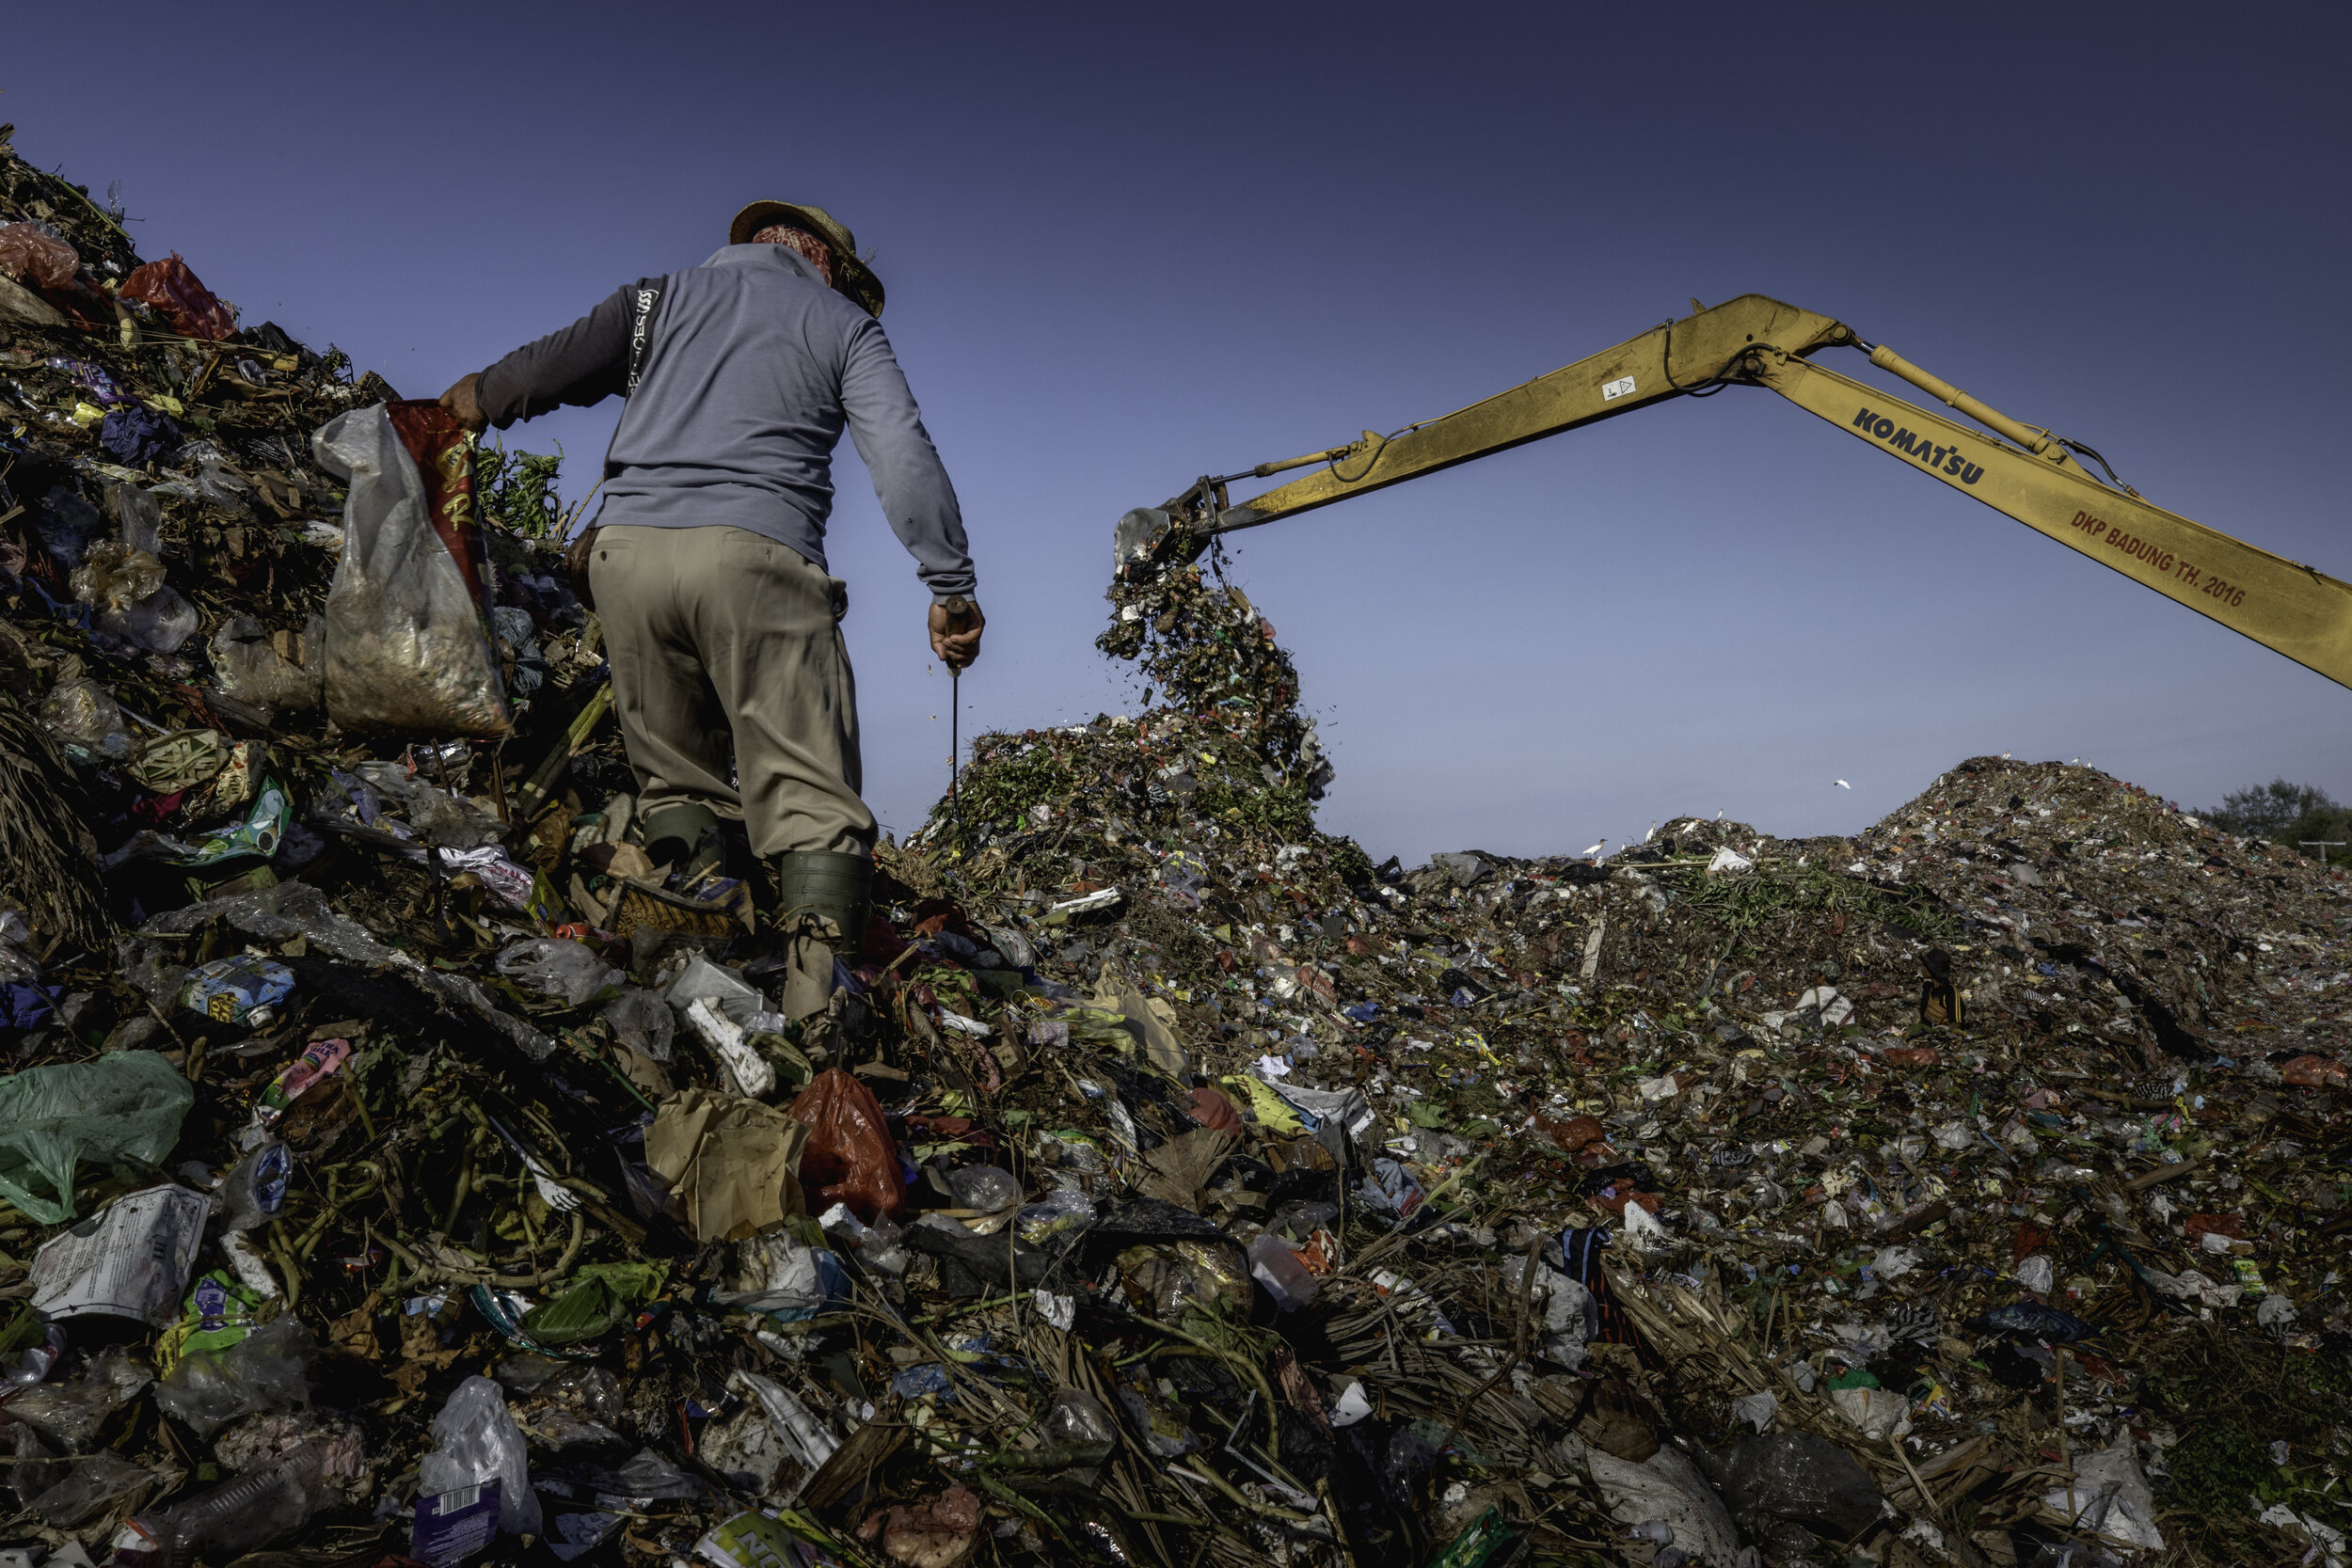  A ragpicker walks trough a mountain of rubbish at a garbage dump in Bali / Indonesia - 2019 